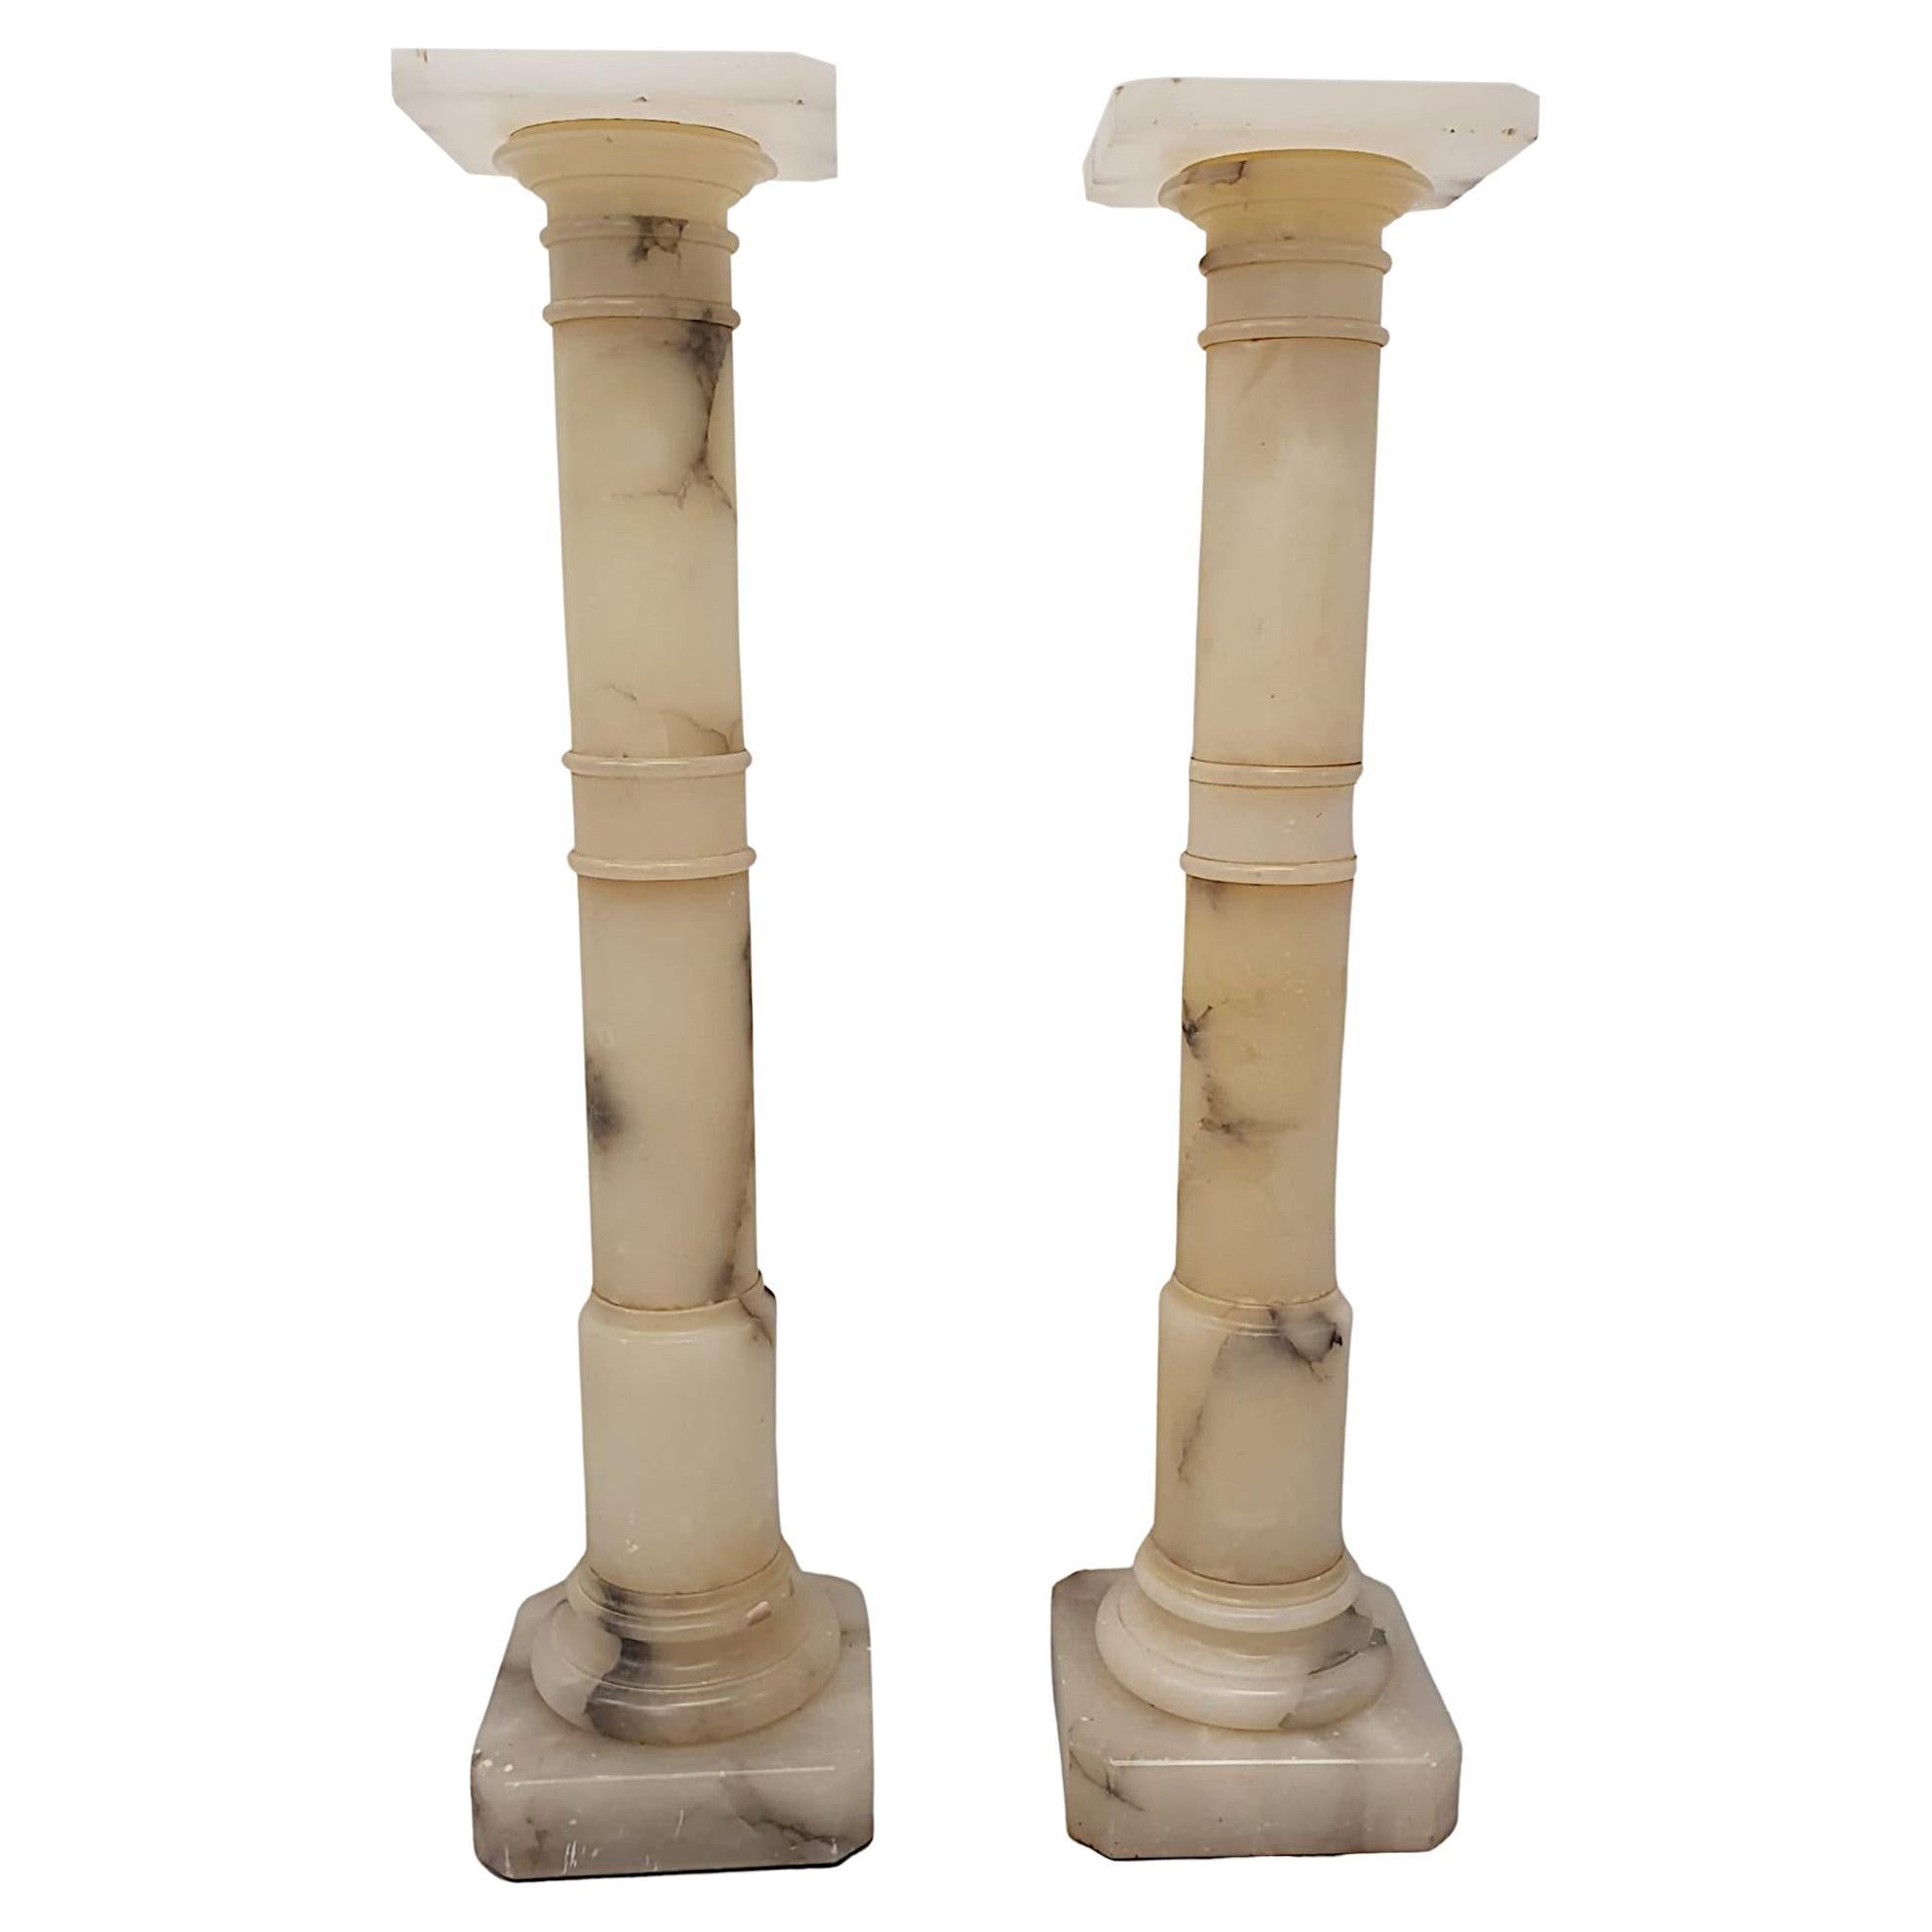 Stunning Pair of Early 20th Century Italian Alabaster Bust or Plant Stands